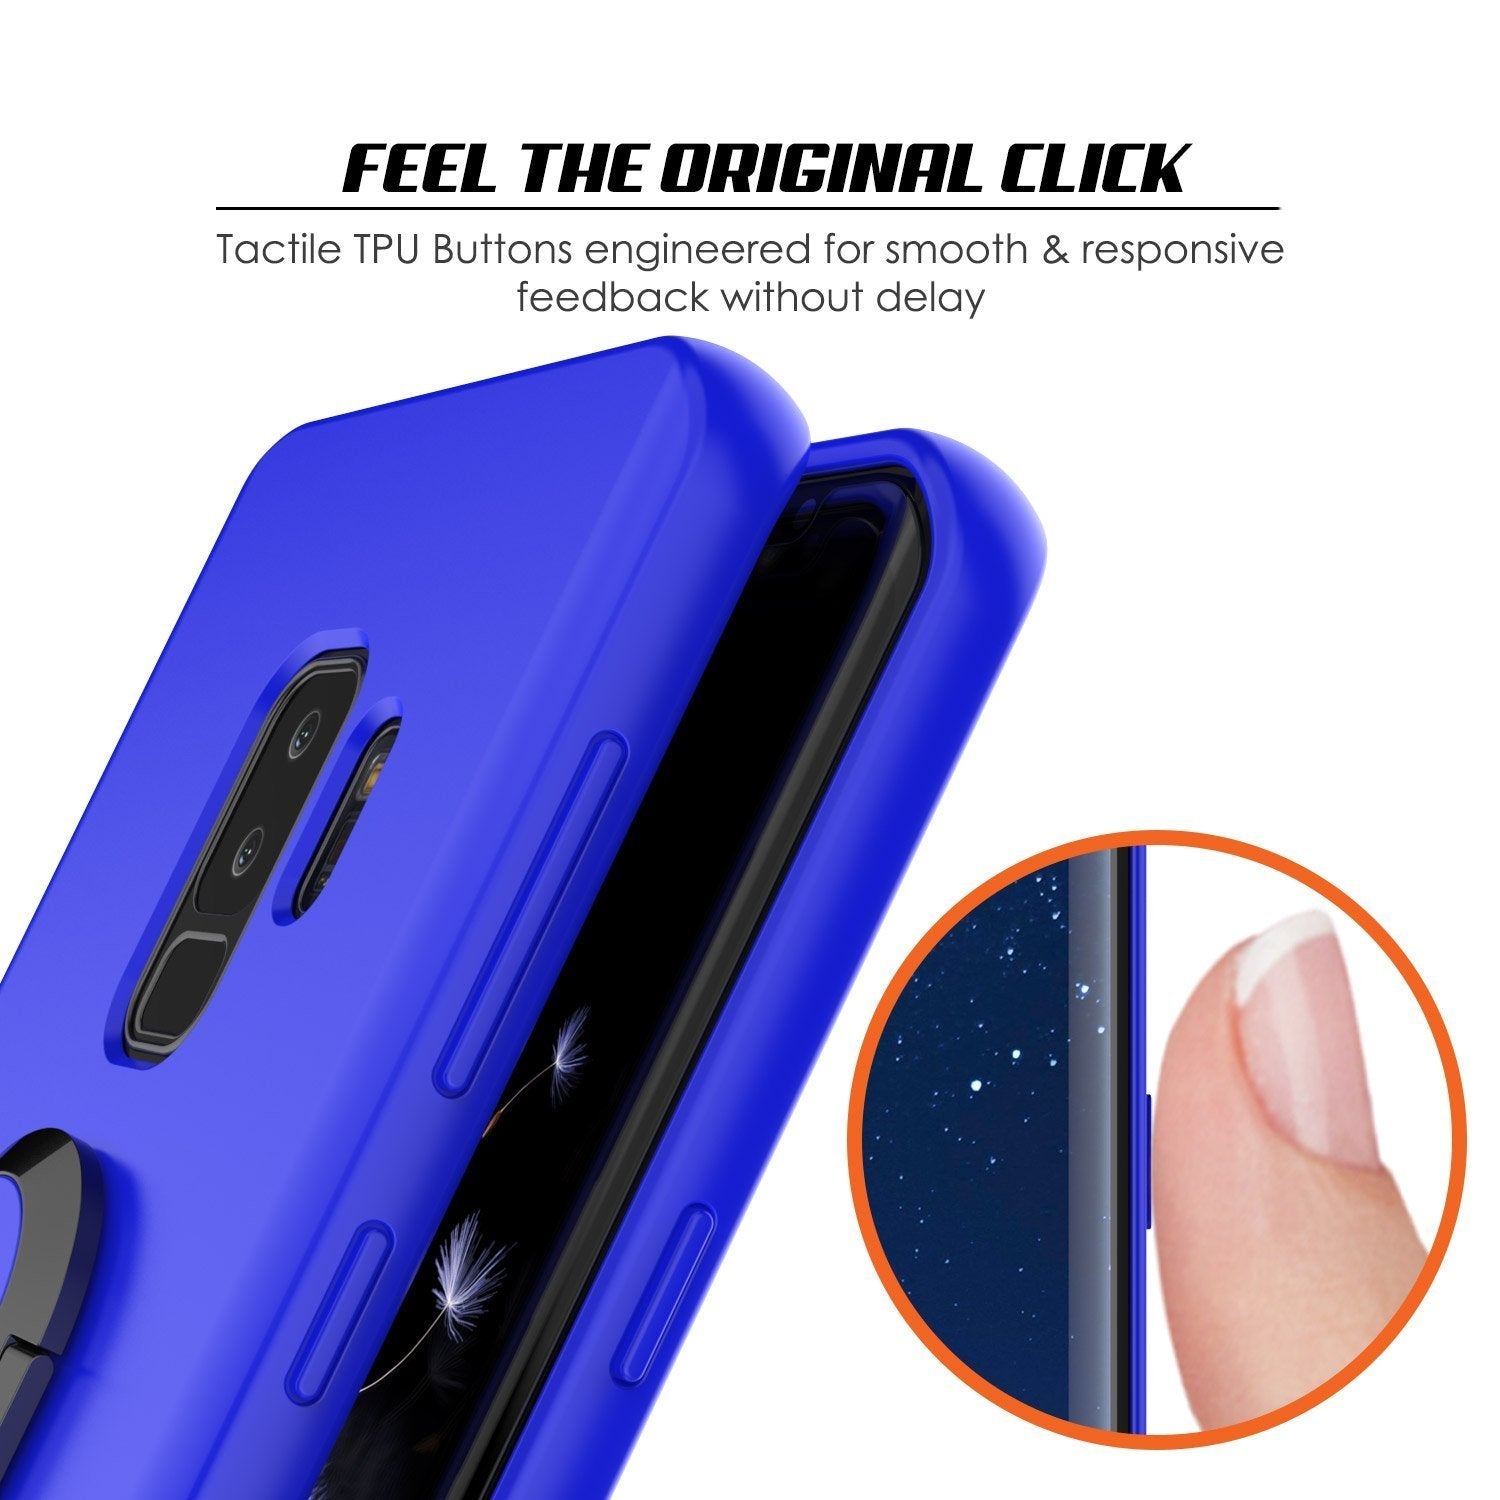 Galaxy S9 PLUS, Punkcase Magnetix Protective TPU Cover W/ Kickstand, Ring Grip Holder & Metal Plate for Magnetic Car Phone Mount PLUS PunkShield Screen Protector for Samsung S9+ Edge [Blue]